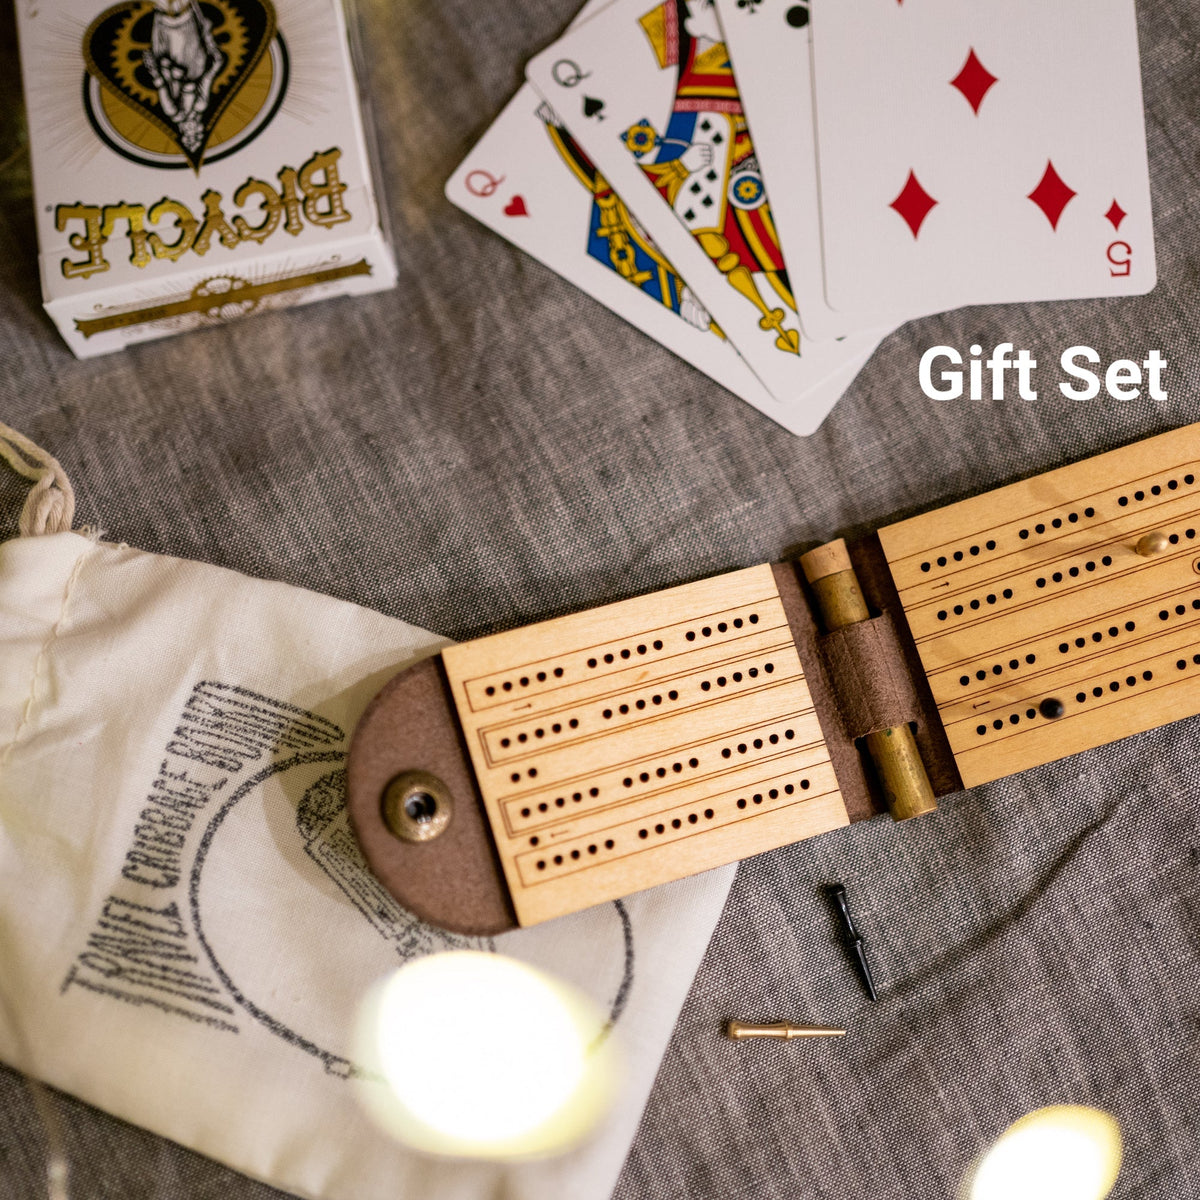 Open leather and wood travel cribbage board with cast metal person on top of a bedspread with a carrying pouch and a deck of cards, which is the &quot;Gift Set&quot;